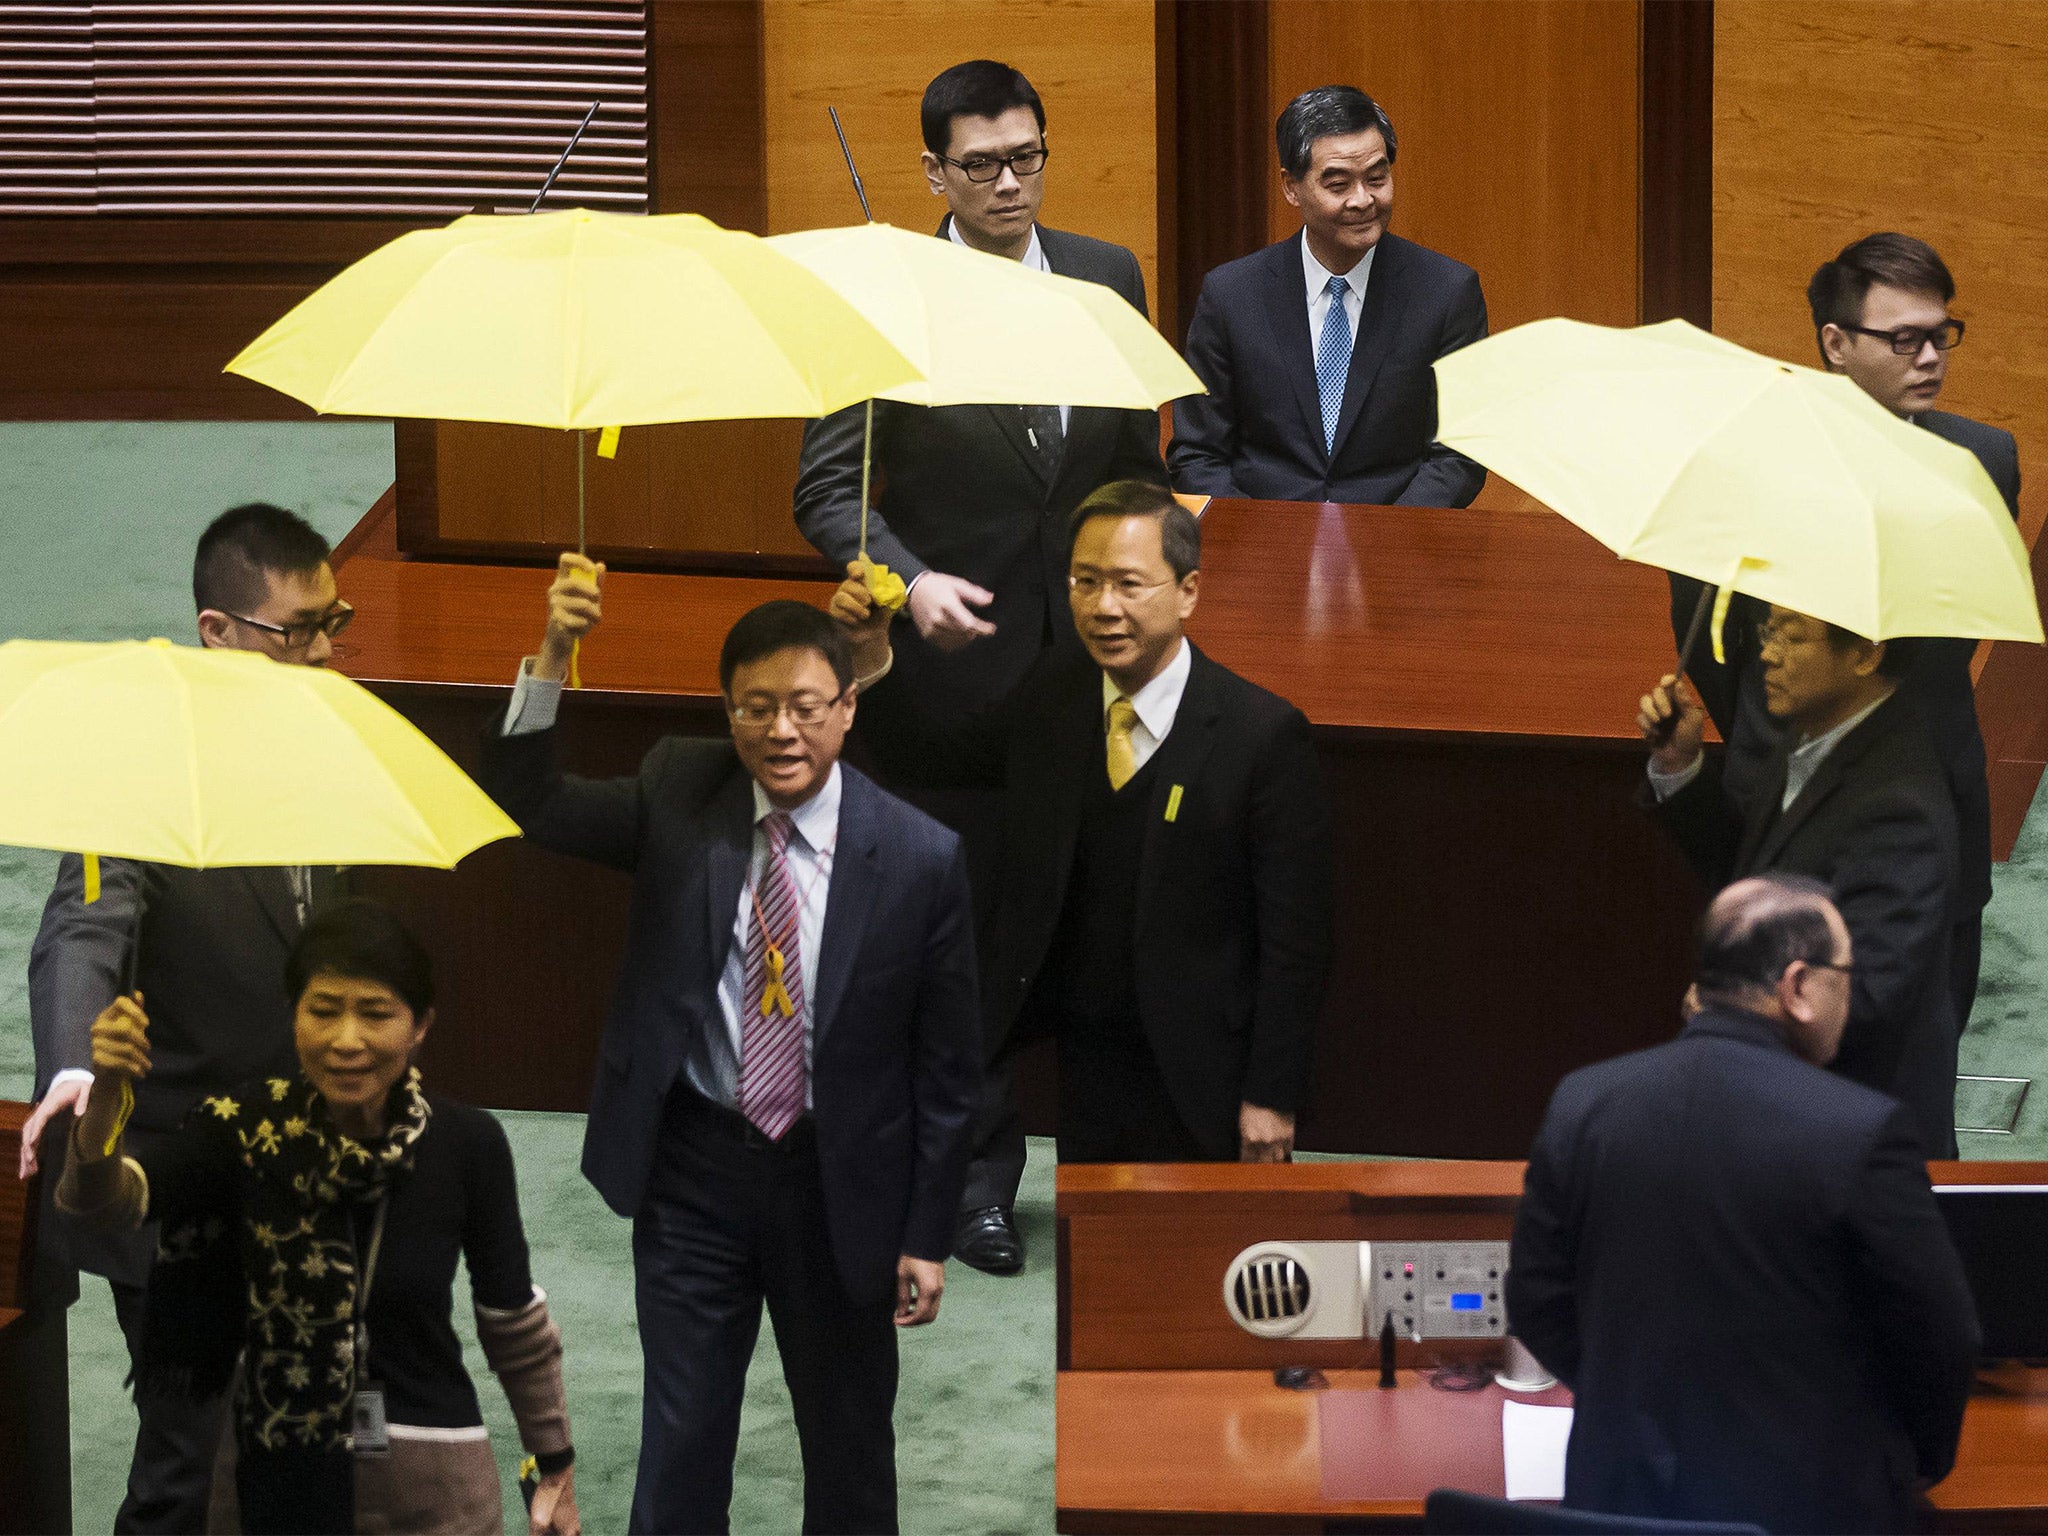 Pro-democracy lawmakers brandish yellow umbrellas, the symbol of the Occupy Central movement, as Chun-ying (blue tie) delivers his address